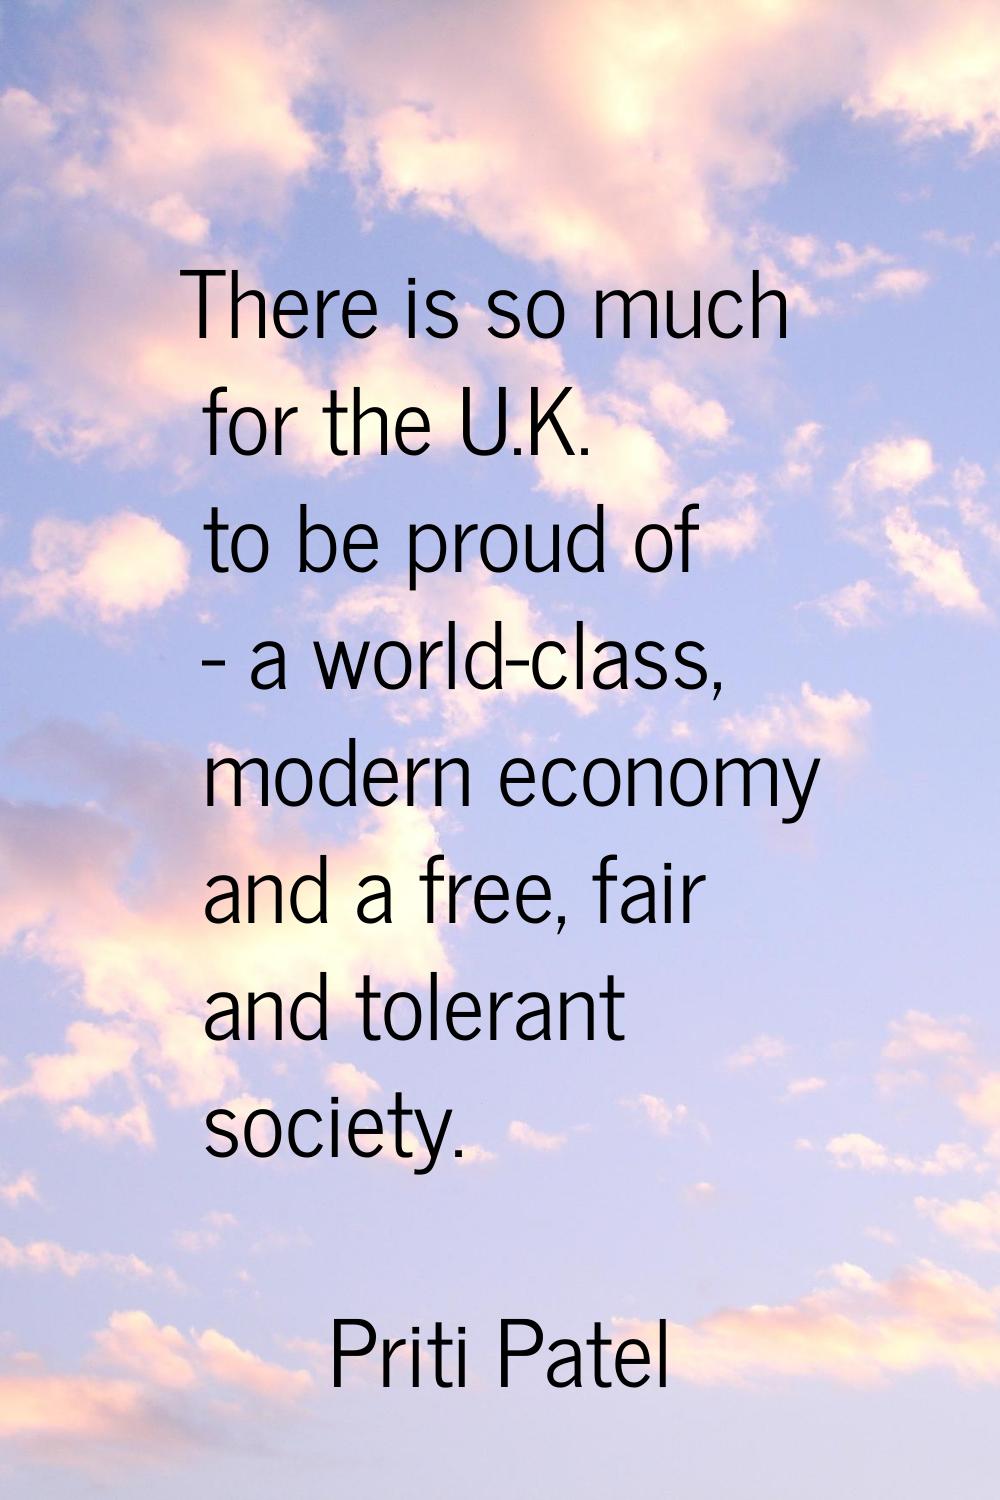 There is so much for the U.K. to be proud of - a world-class, modern economy and a free, fair and t